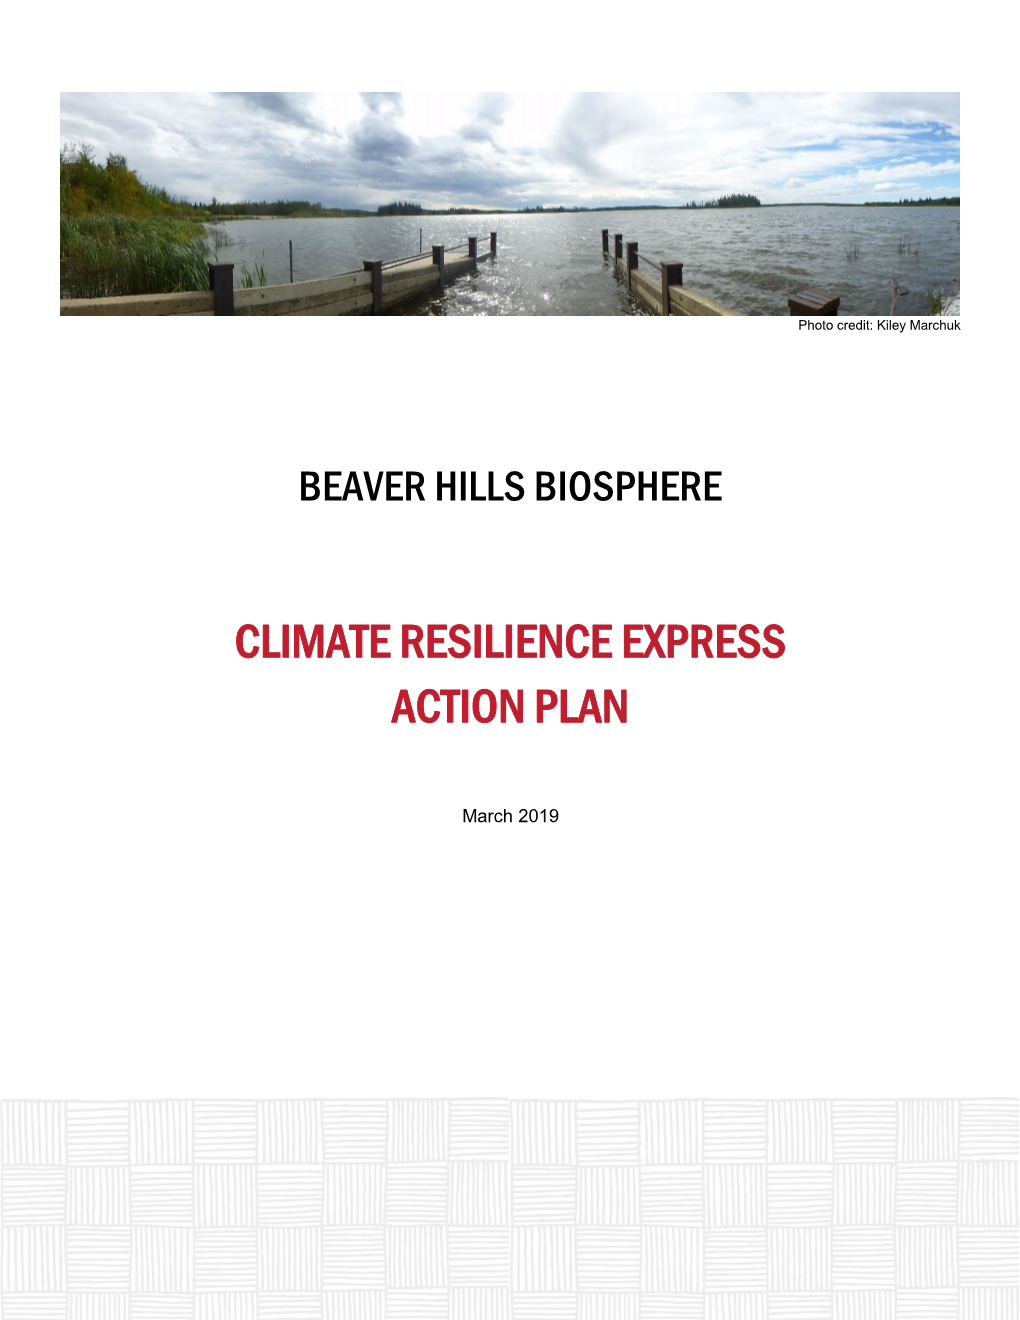 Beaver Hills Biosphere Climate Resilience Action Plan